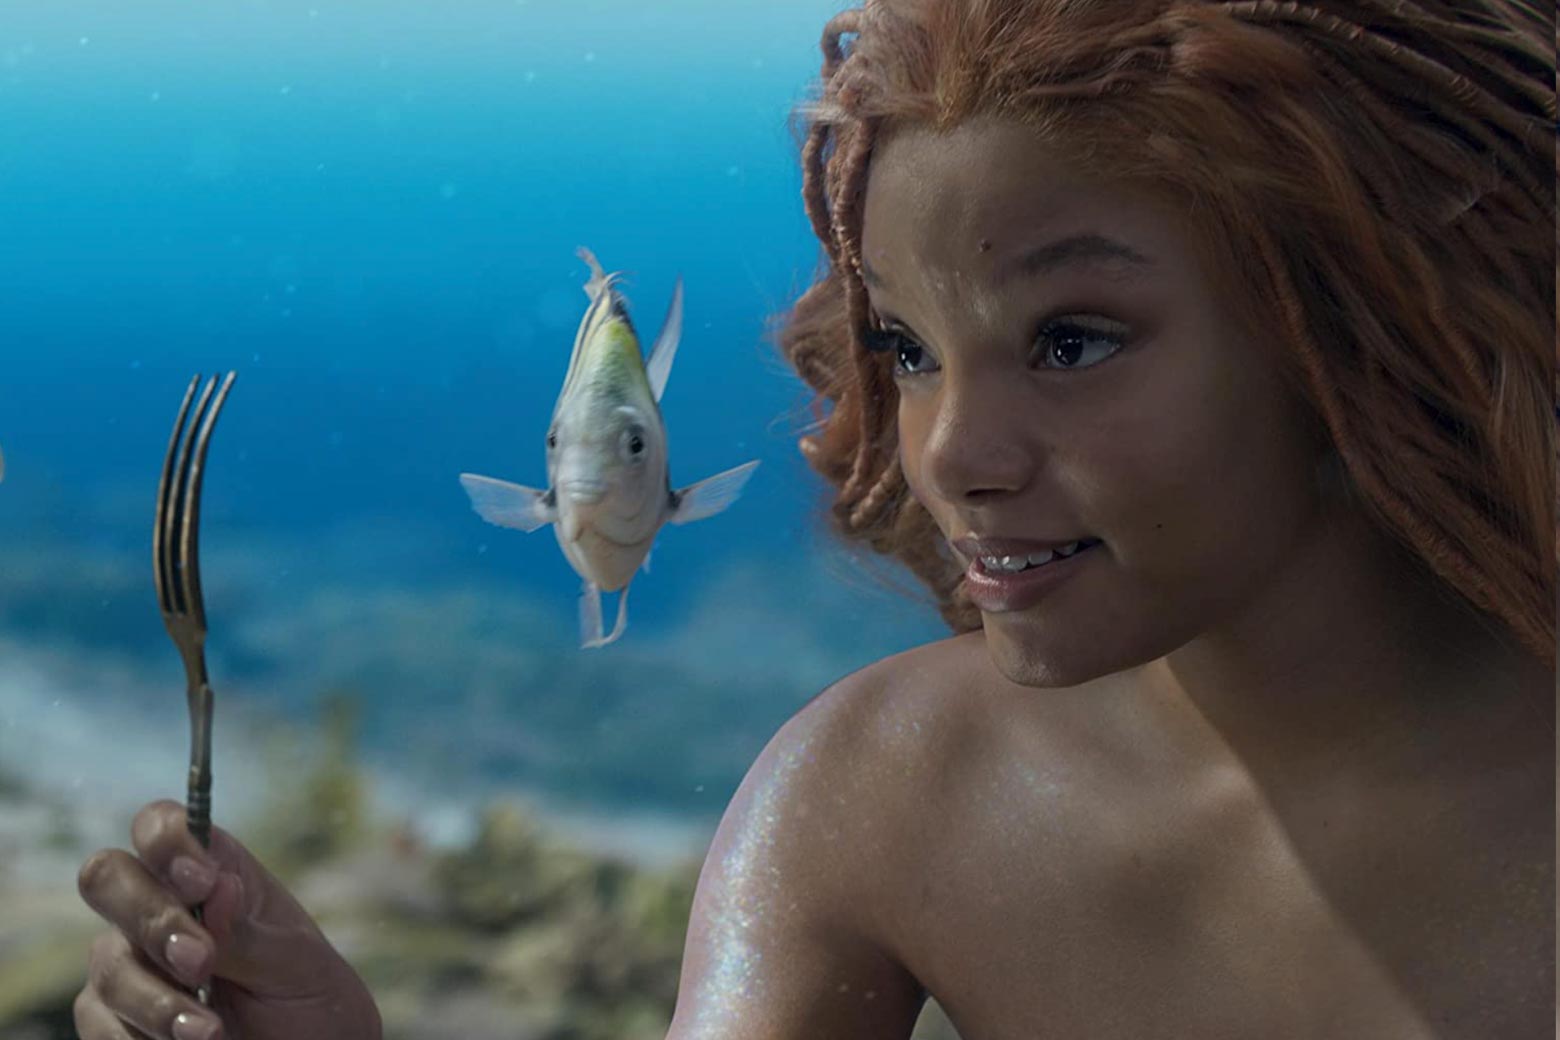 The Little Mermaid: What kind of fish is Flounder? A marine